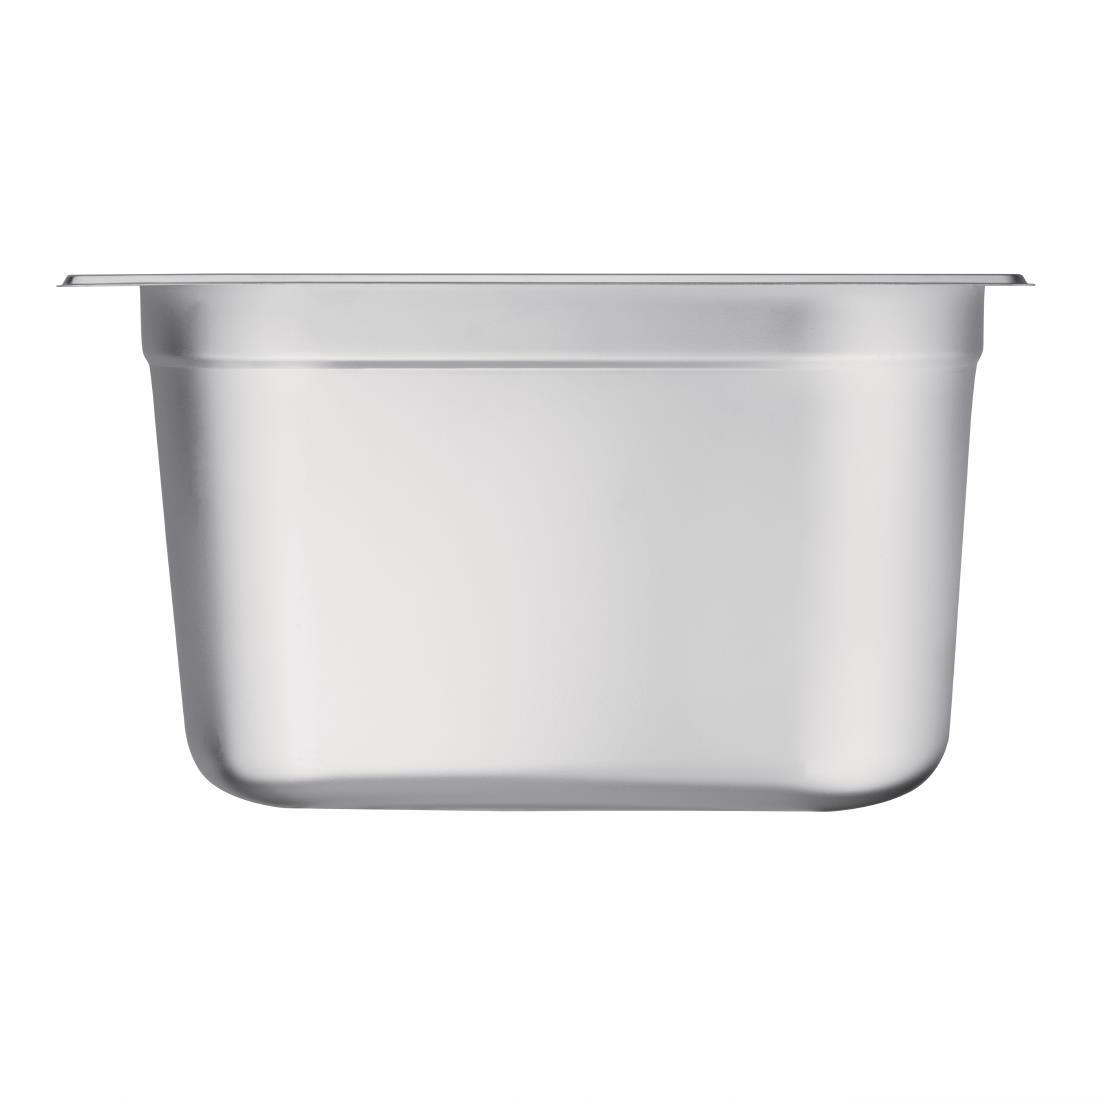 Vogue Stainless Steel Gastronorm 2/3 Pan 200mm - GM315  - 2